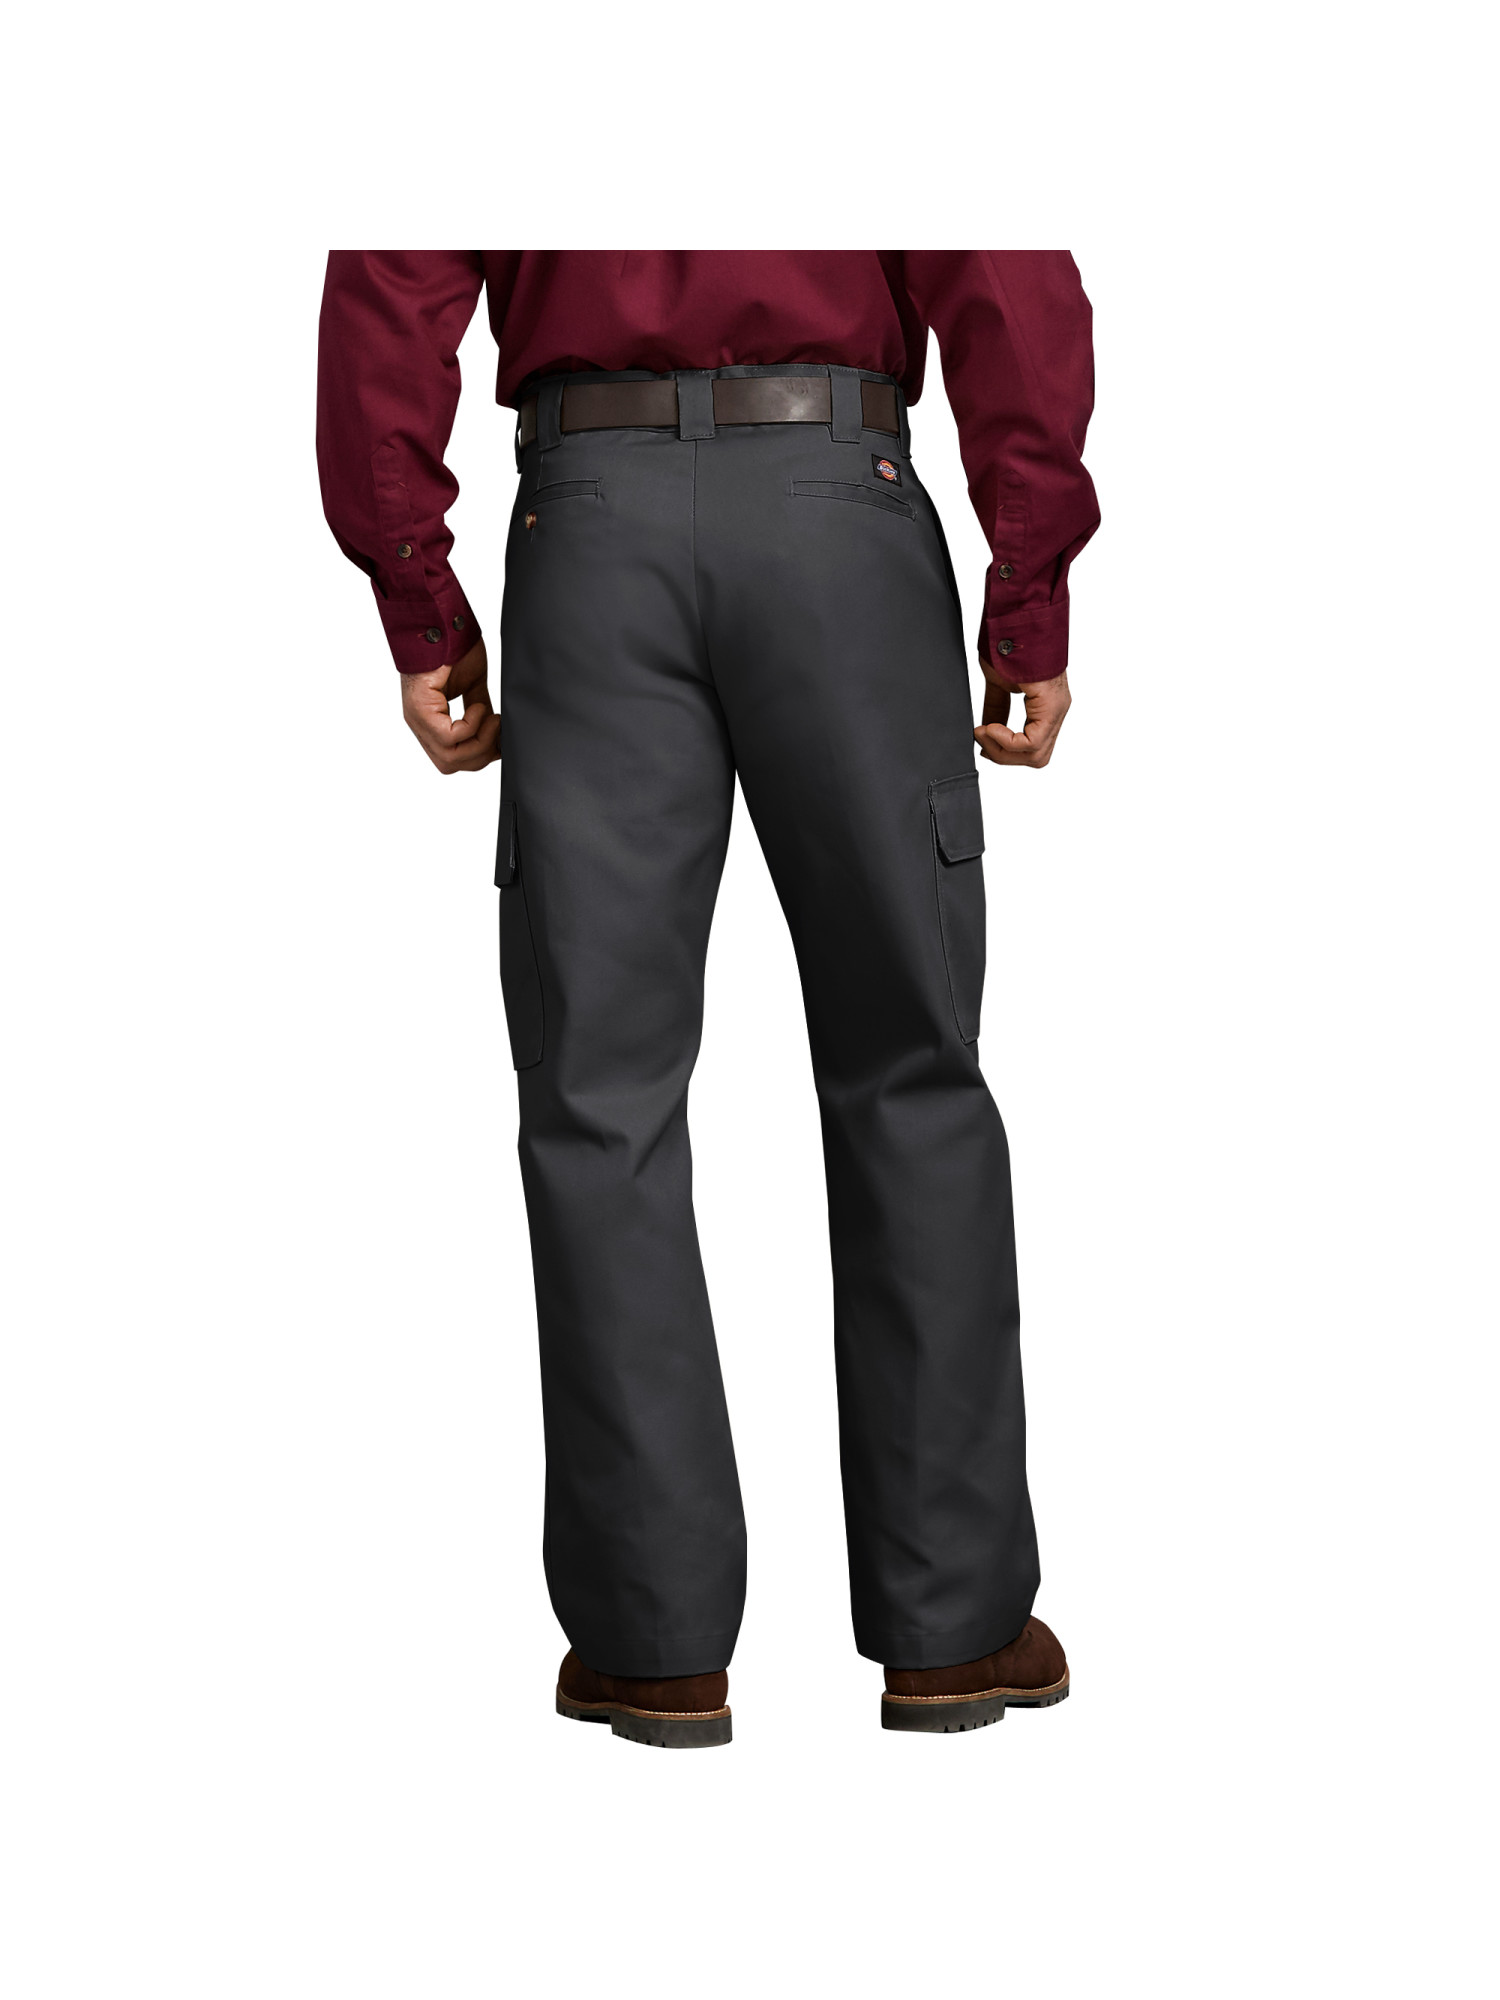 Dickies Mens and Big Mens Relaxed Fit Straight Leg Cargo Work Pants - image 2 of 2